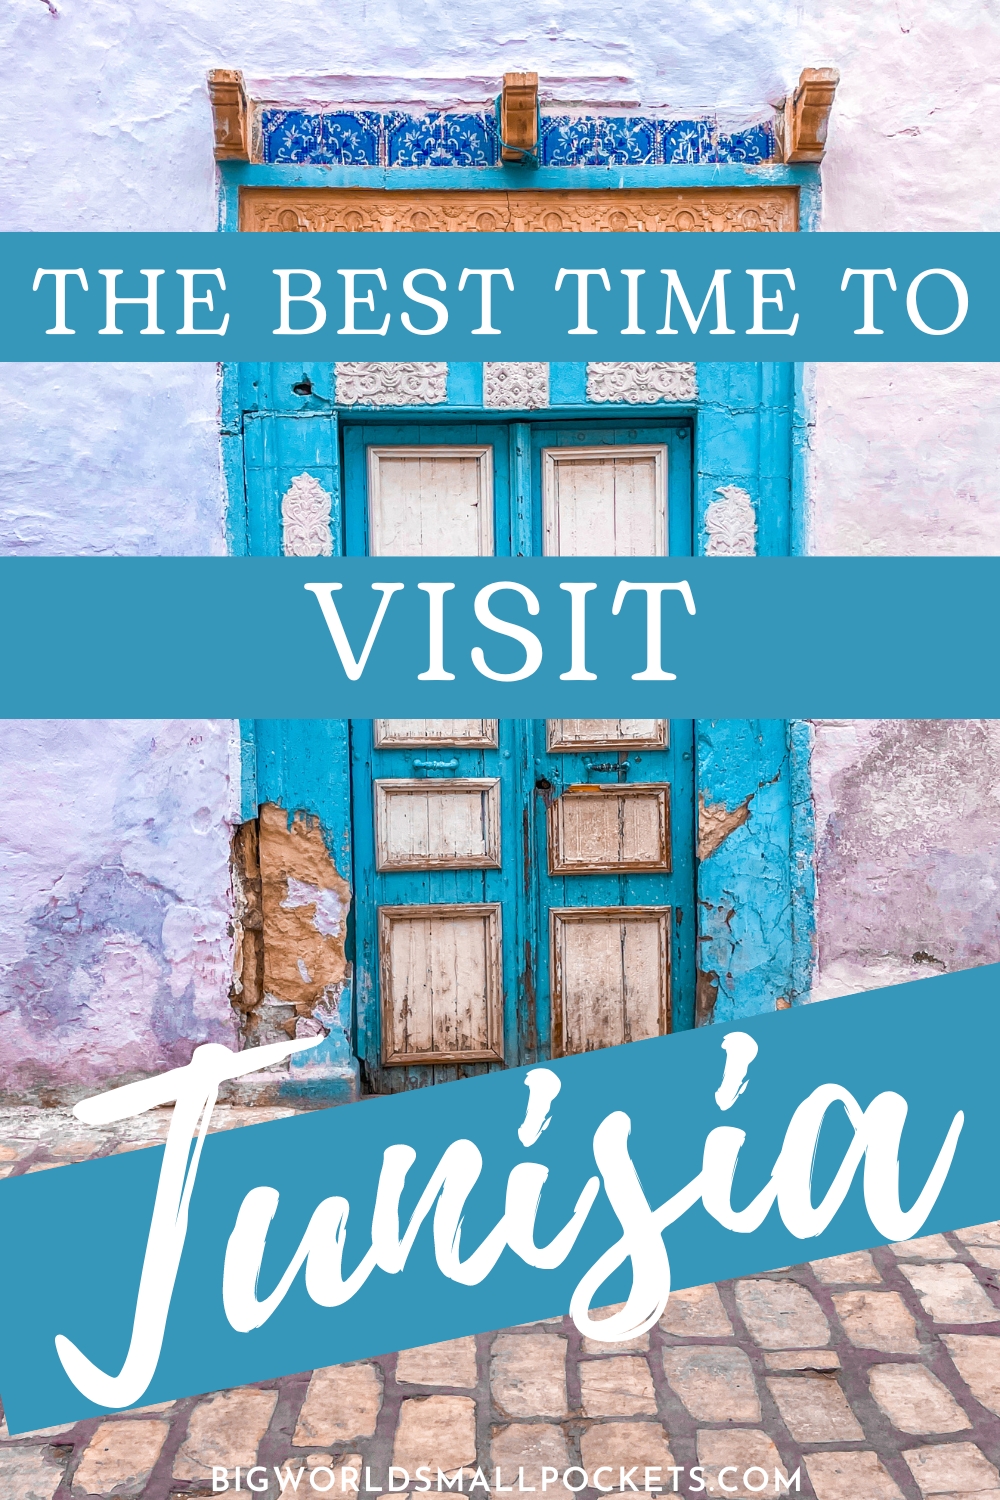 The Best Time to Travel to Tunisia